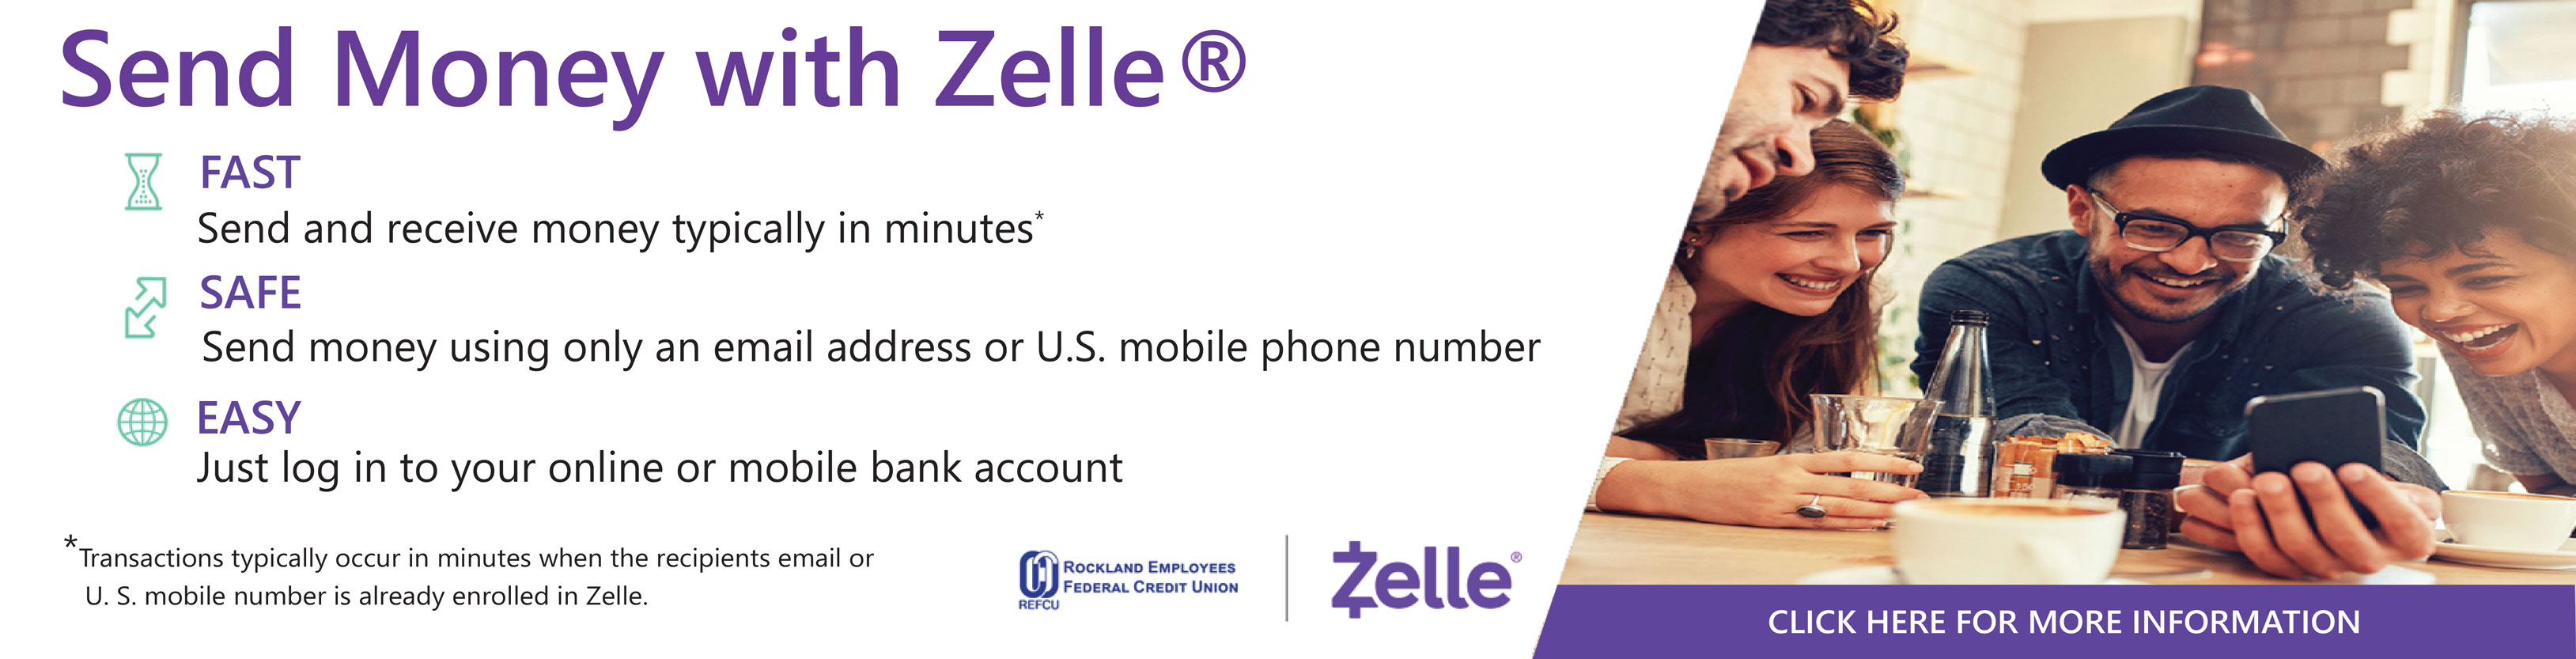 Send Money with Zelle